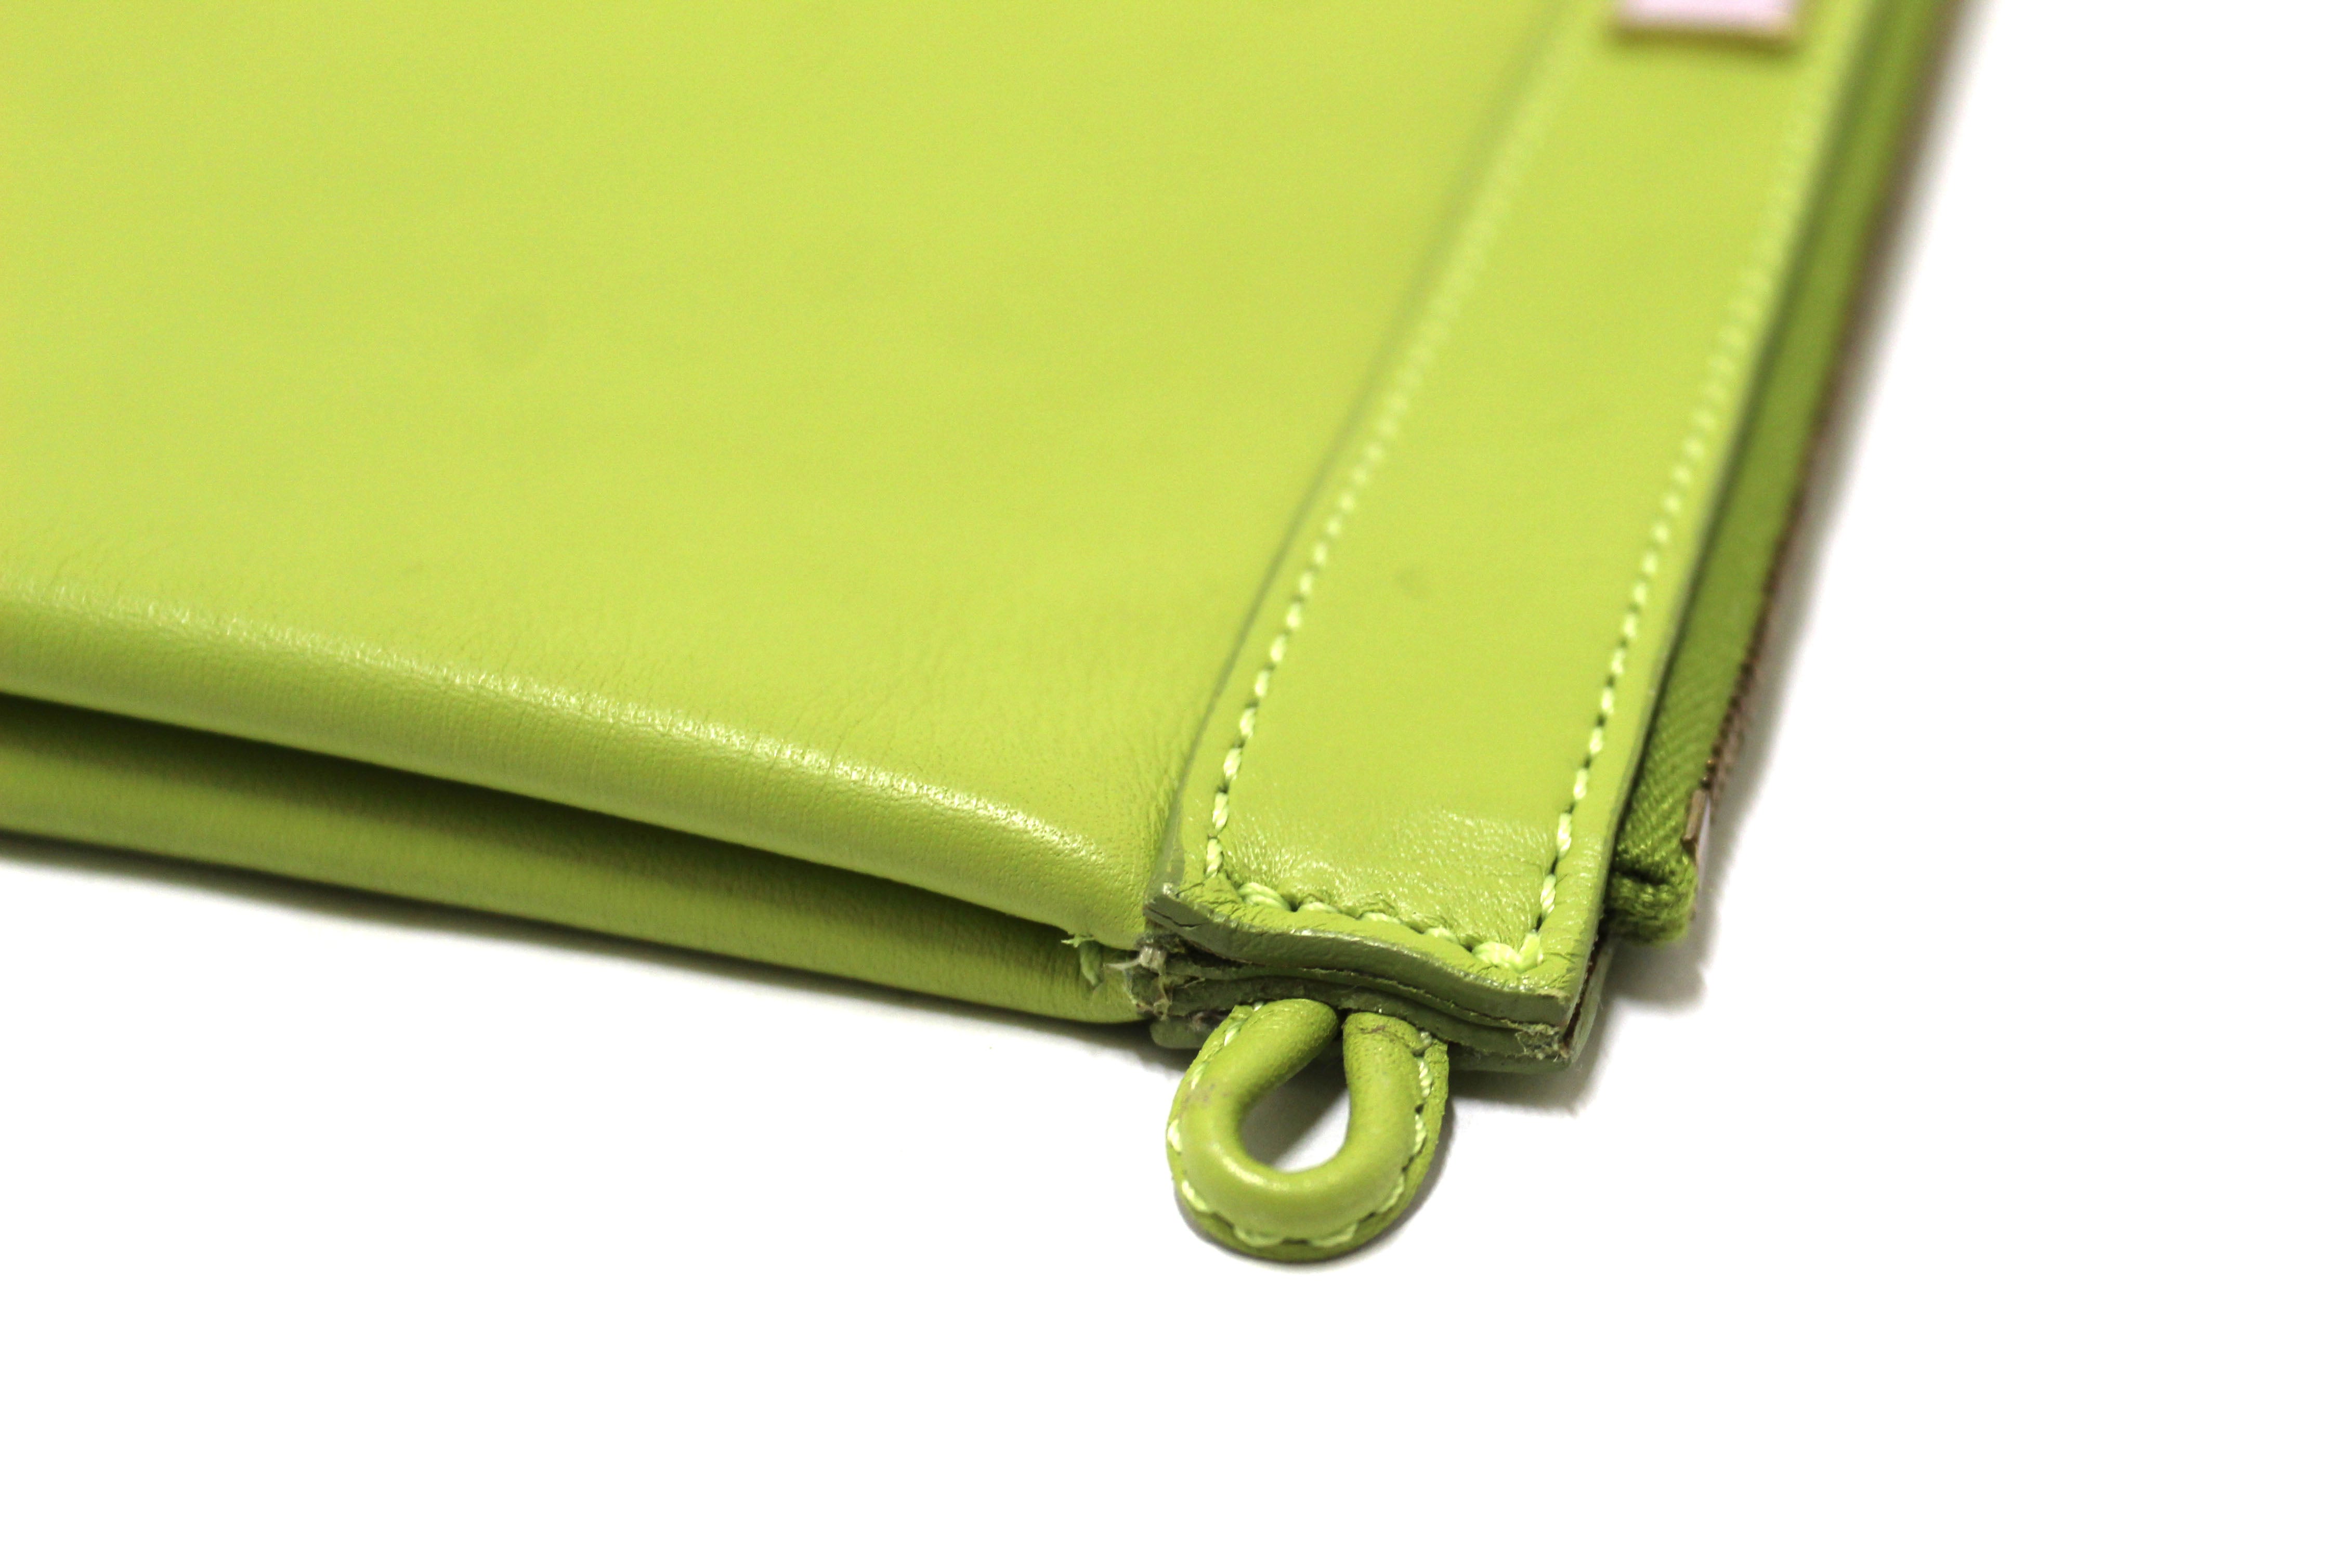 Authentic Jimmy Choo Lime Green Leather Zipper Pouch